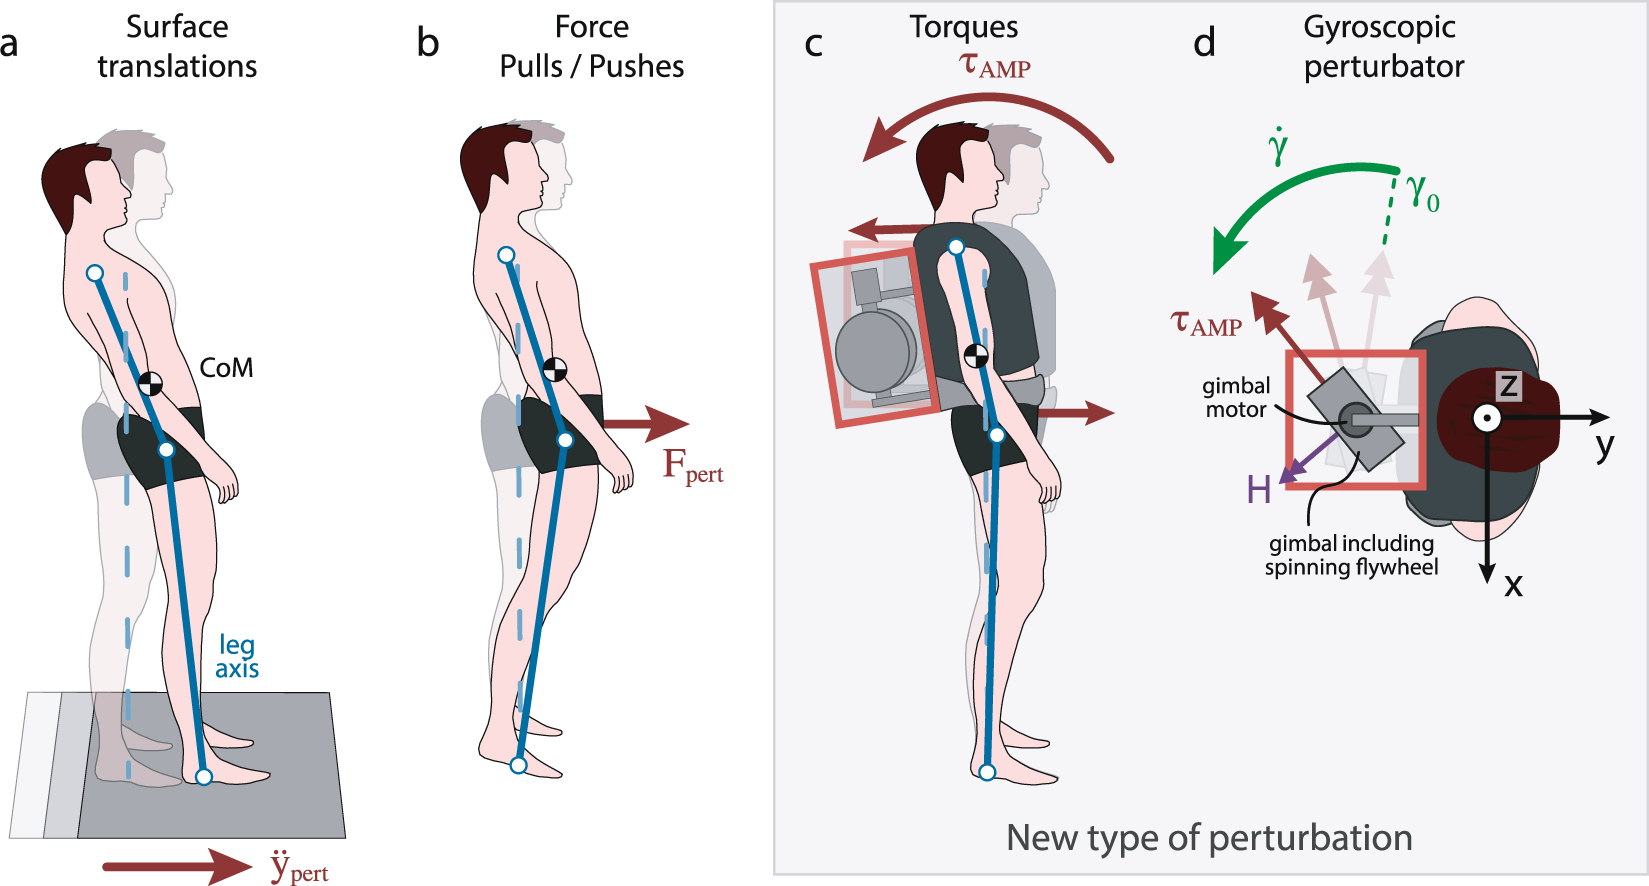 Muscles attaching the upper limb to the trunk – Human Kinetics